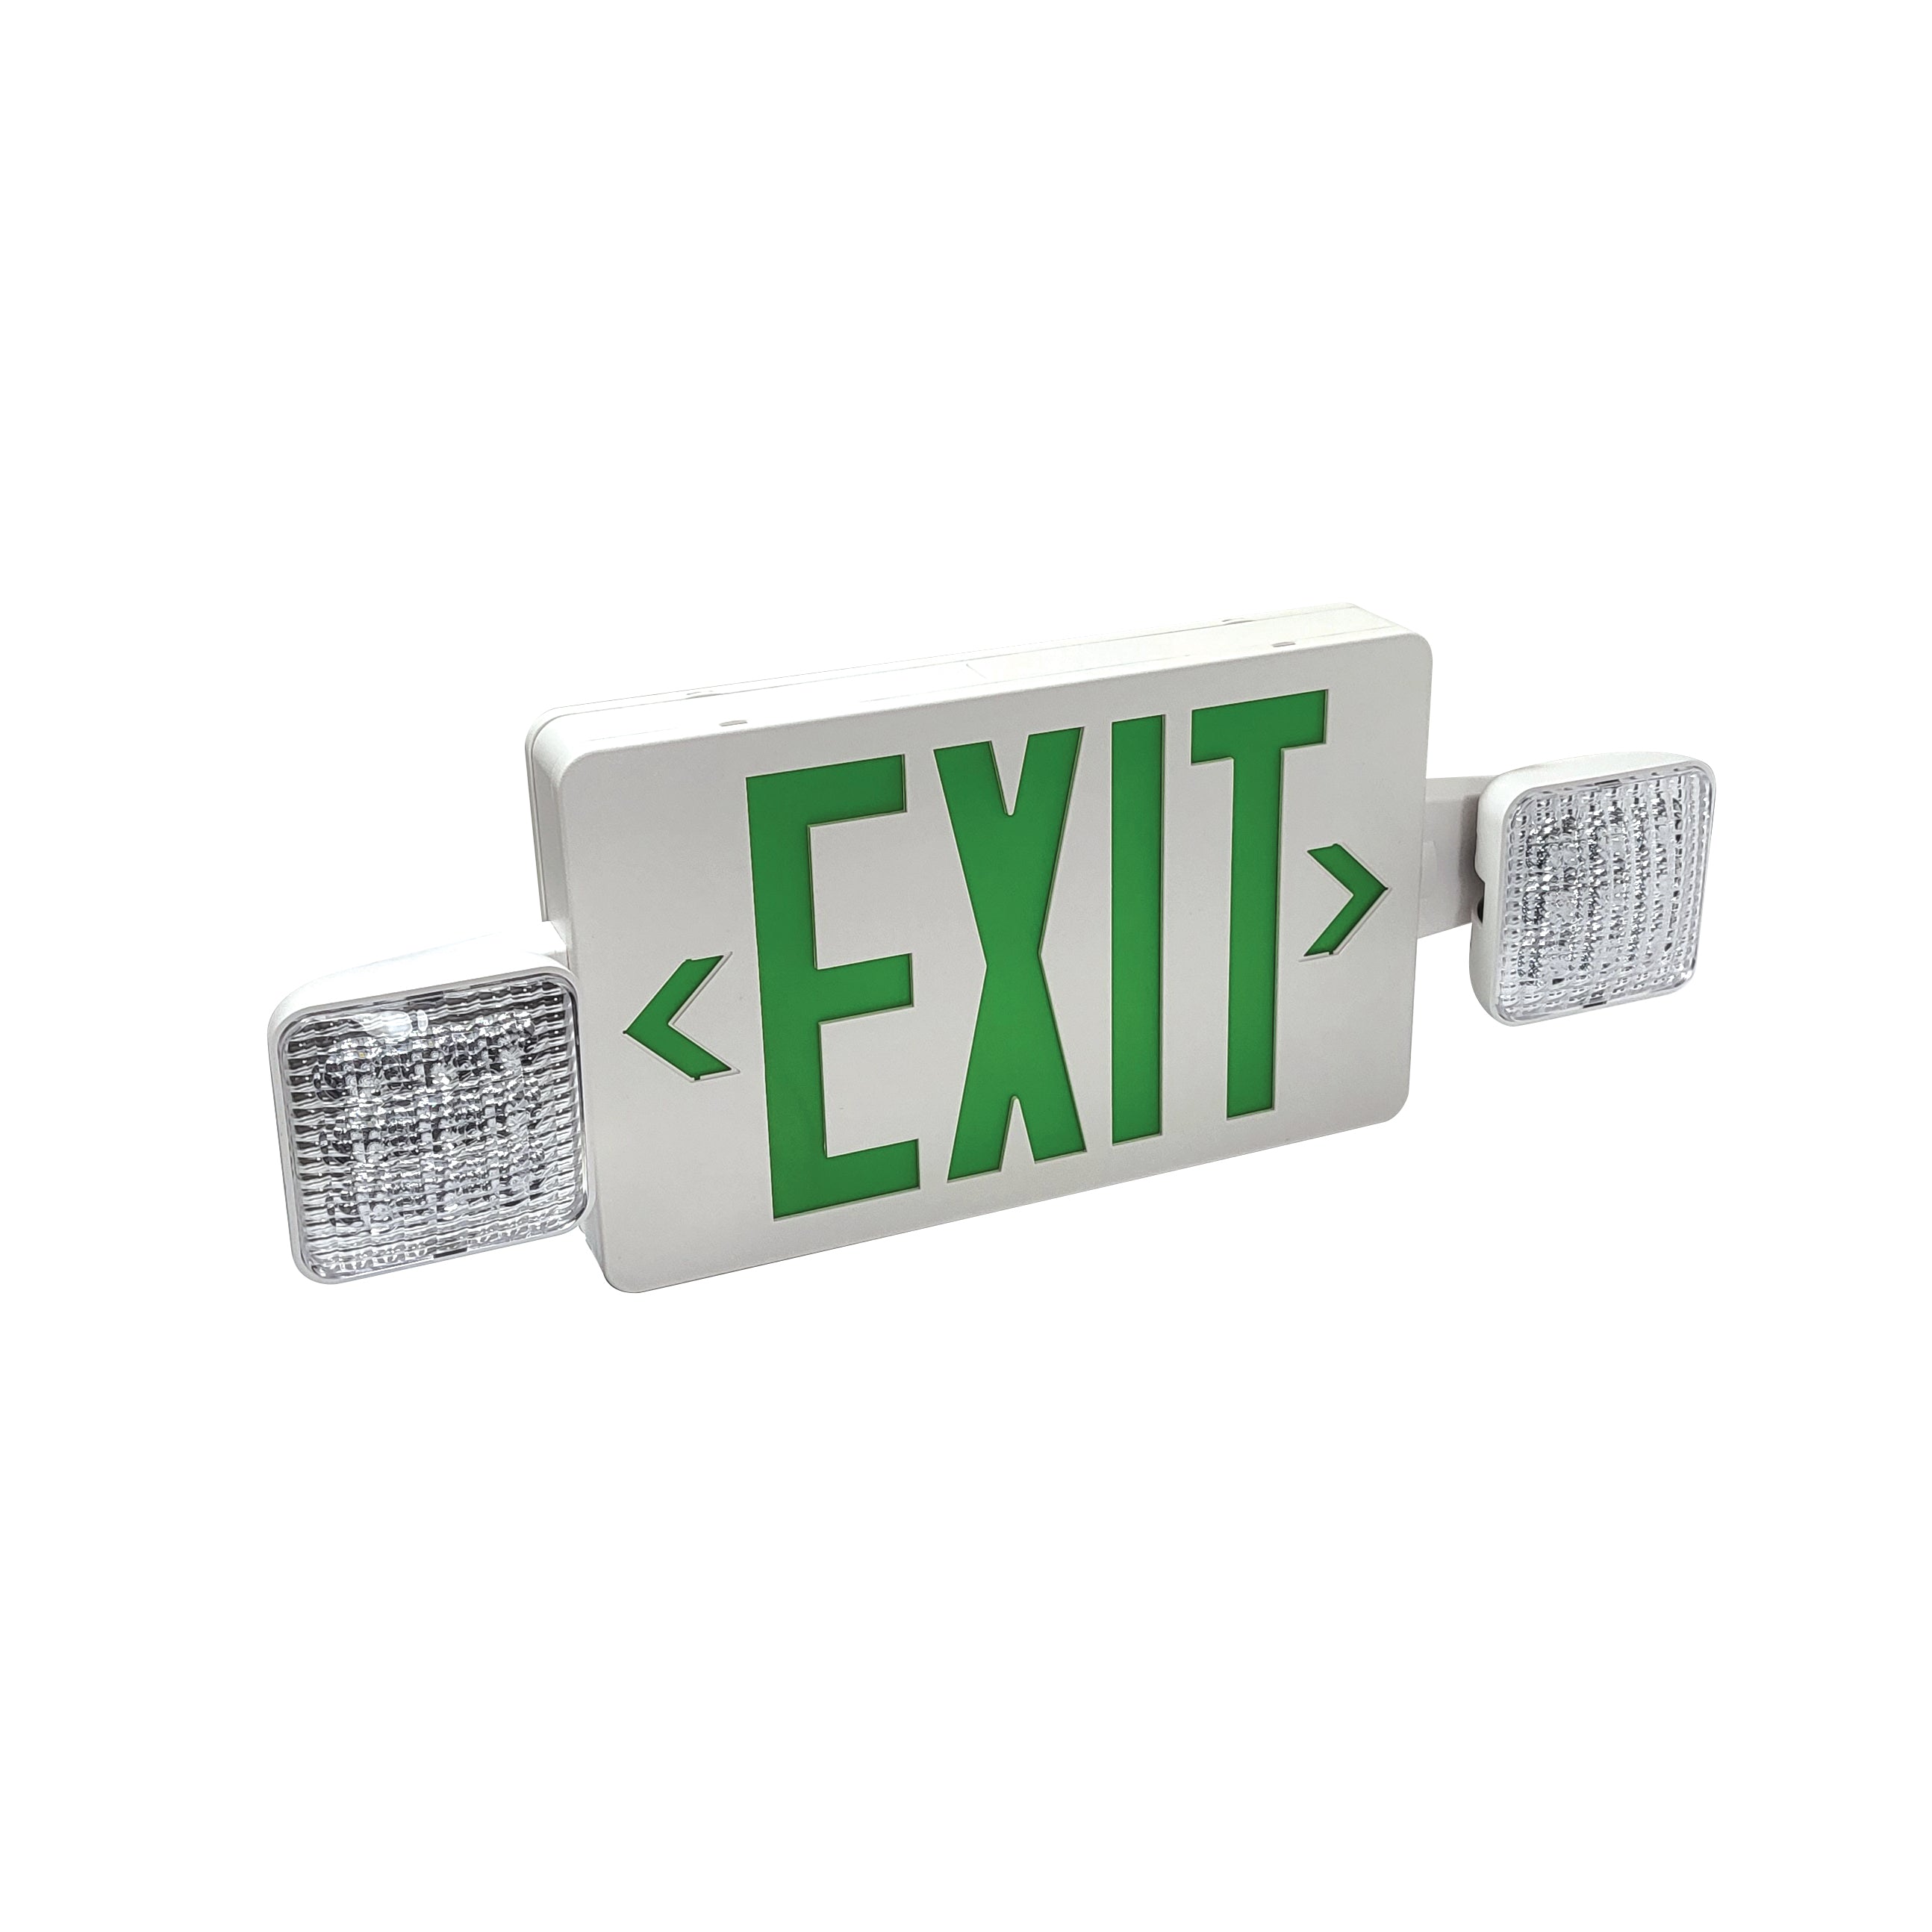 Nora Lighting NEX-712-LED/G LED Exit and Emergency Combination With Adjustable Heads, Battery Backup, Green Letters / White Housing - White